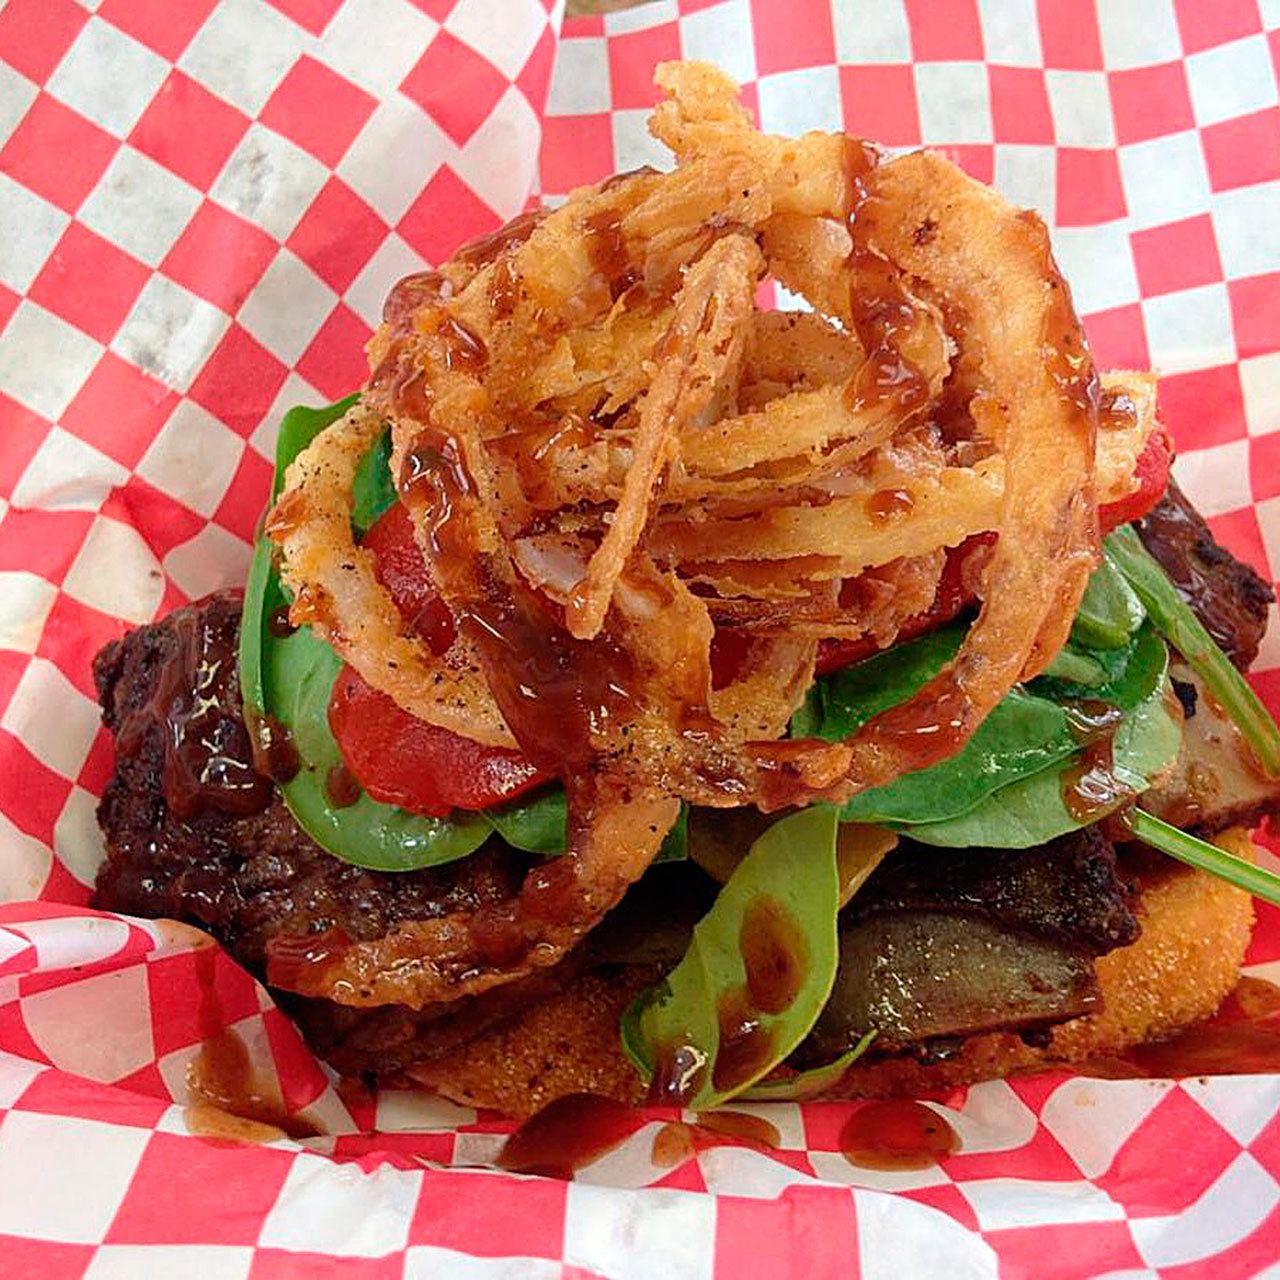 The open-faced braised short ribs sandwich will be available at Wiley’s Home Cooking food truck when it opens Feb. 8 in Bremerton.                                Courtesy of Willie Mae Sharpe